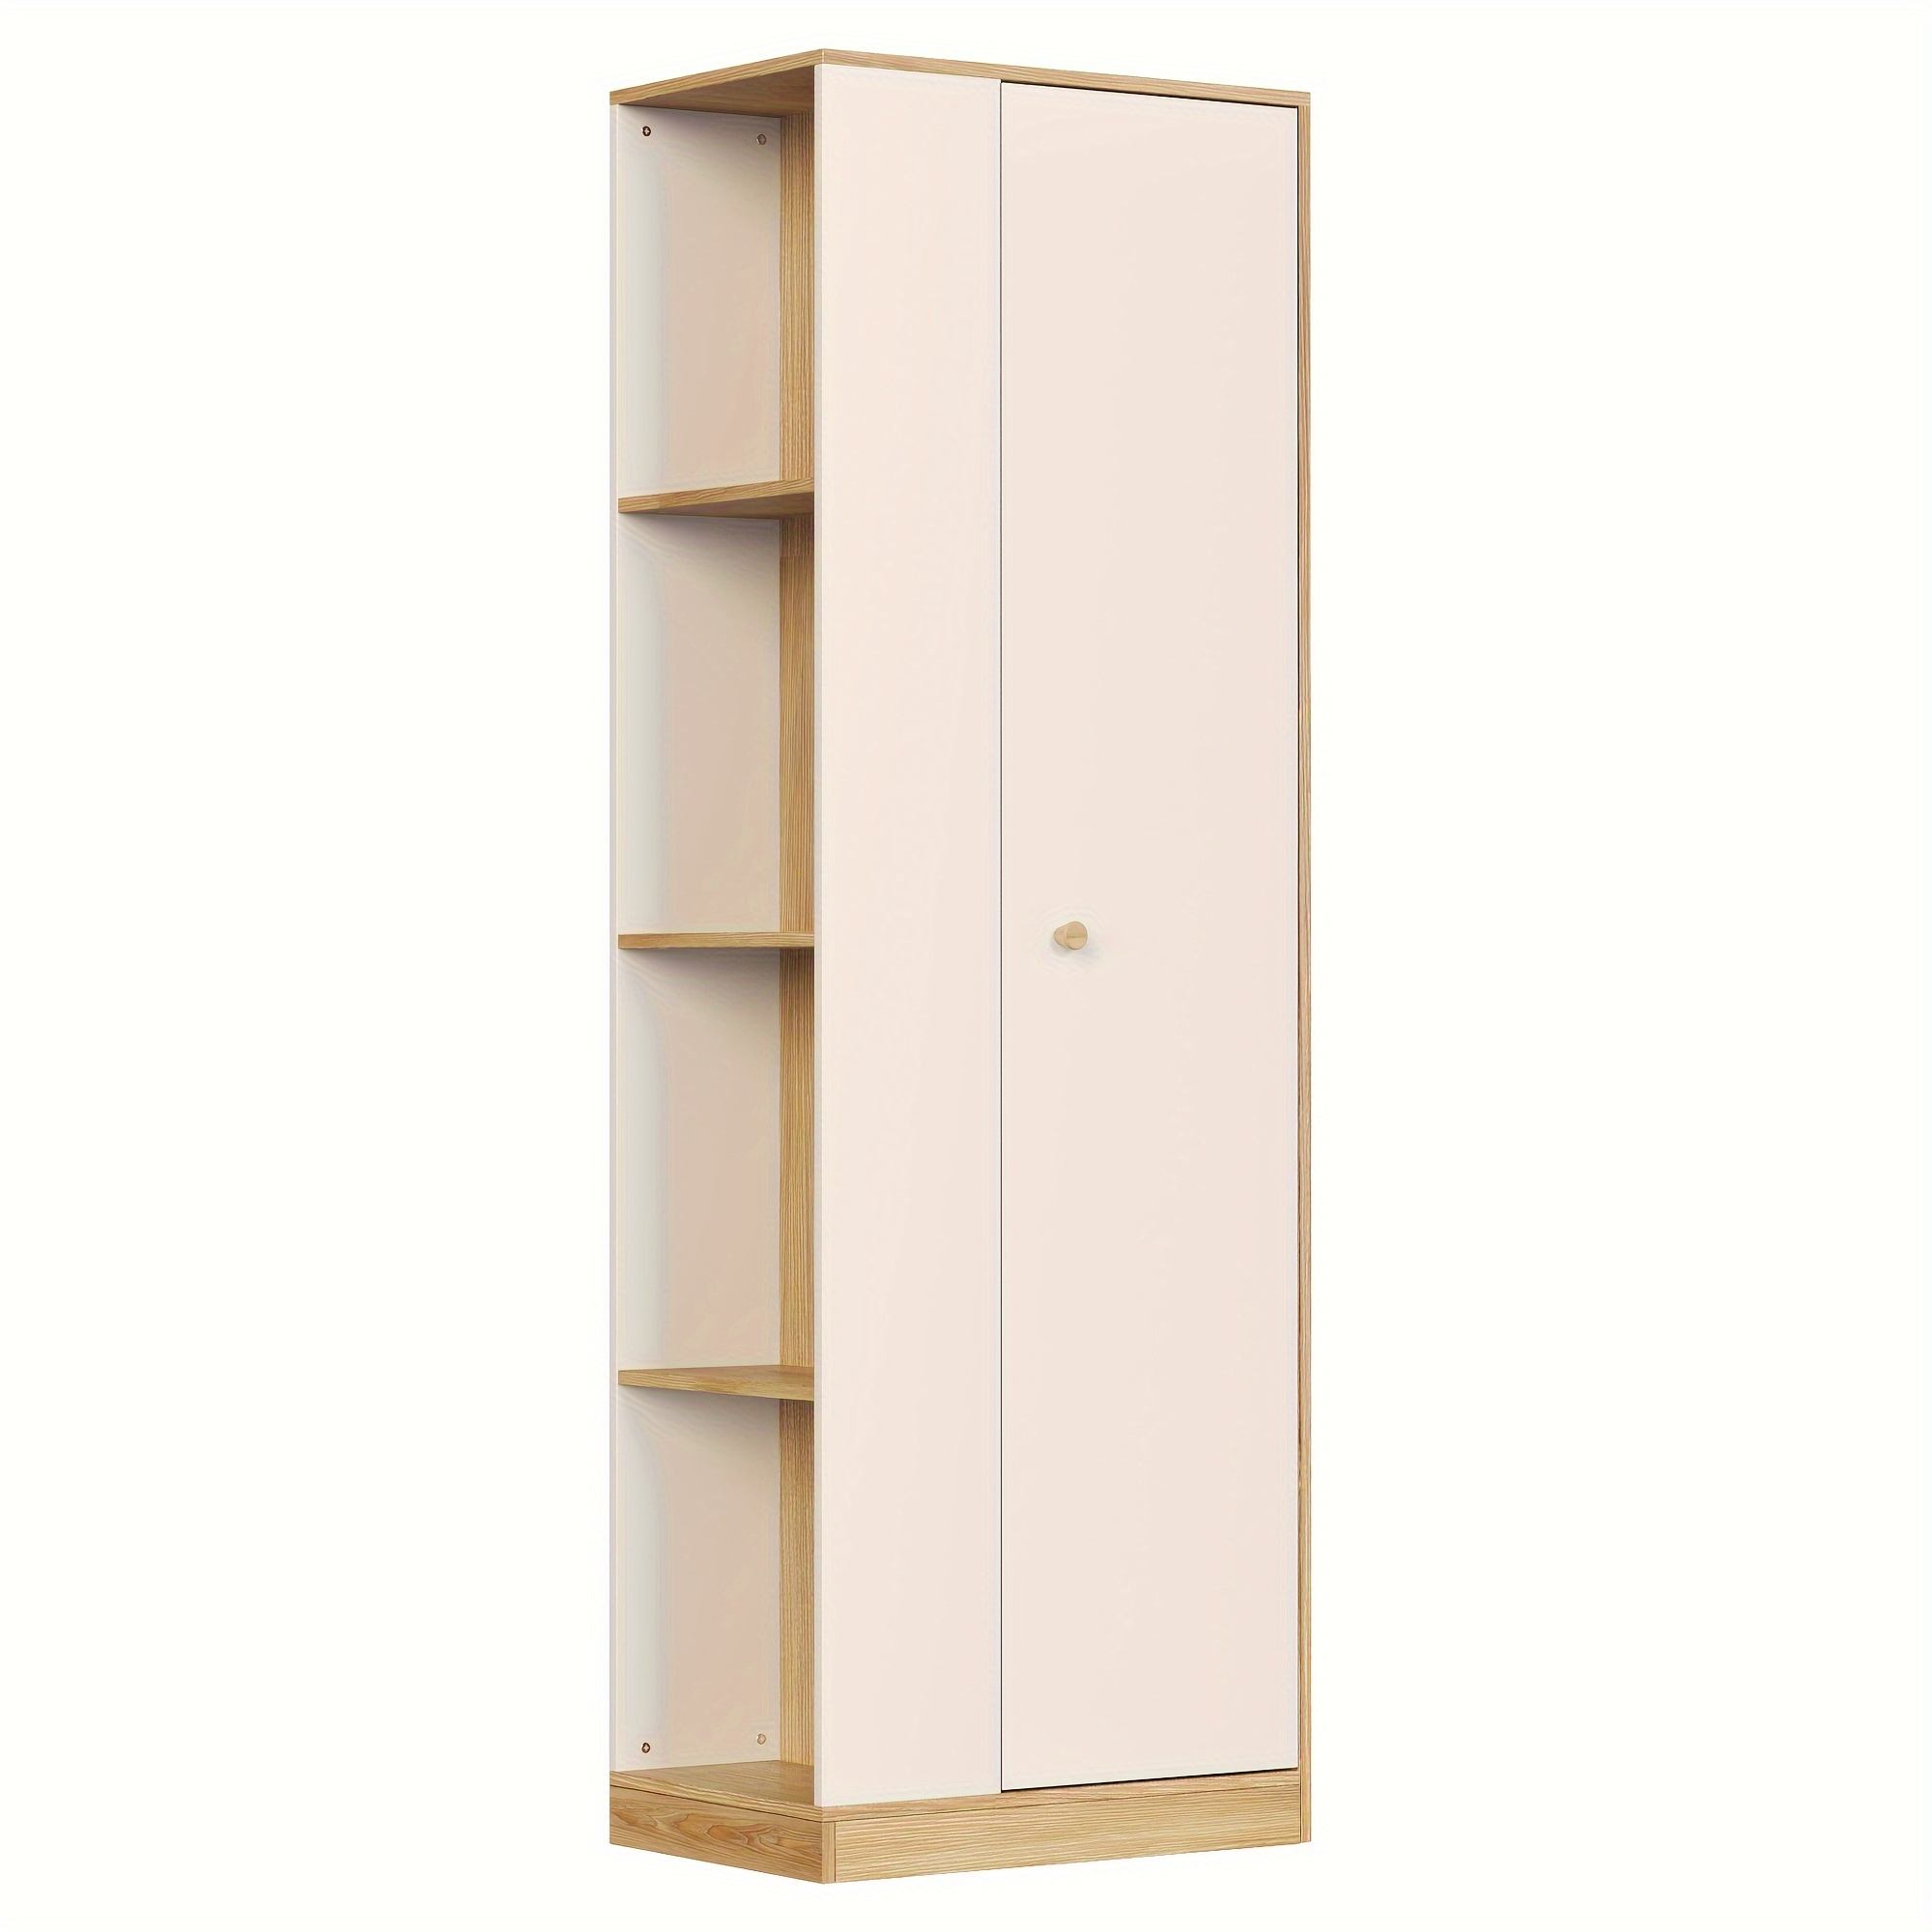 

Modern Wardrobe, White Floor Storage Cabinet With Hangers, Spacious And Versatile, Efficient Storage Easy To Install, Dimensions: 15.7" D X 23.6" W X 70.8" H